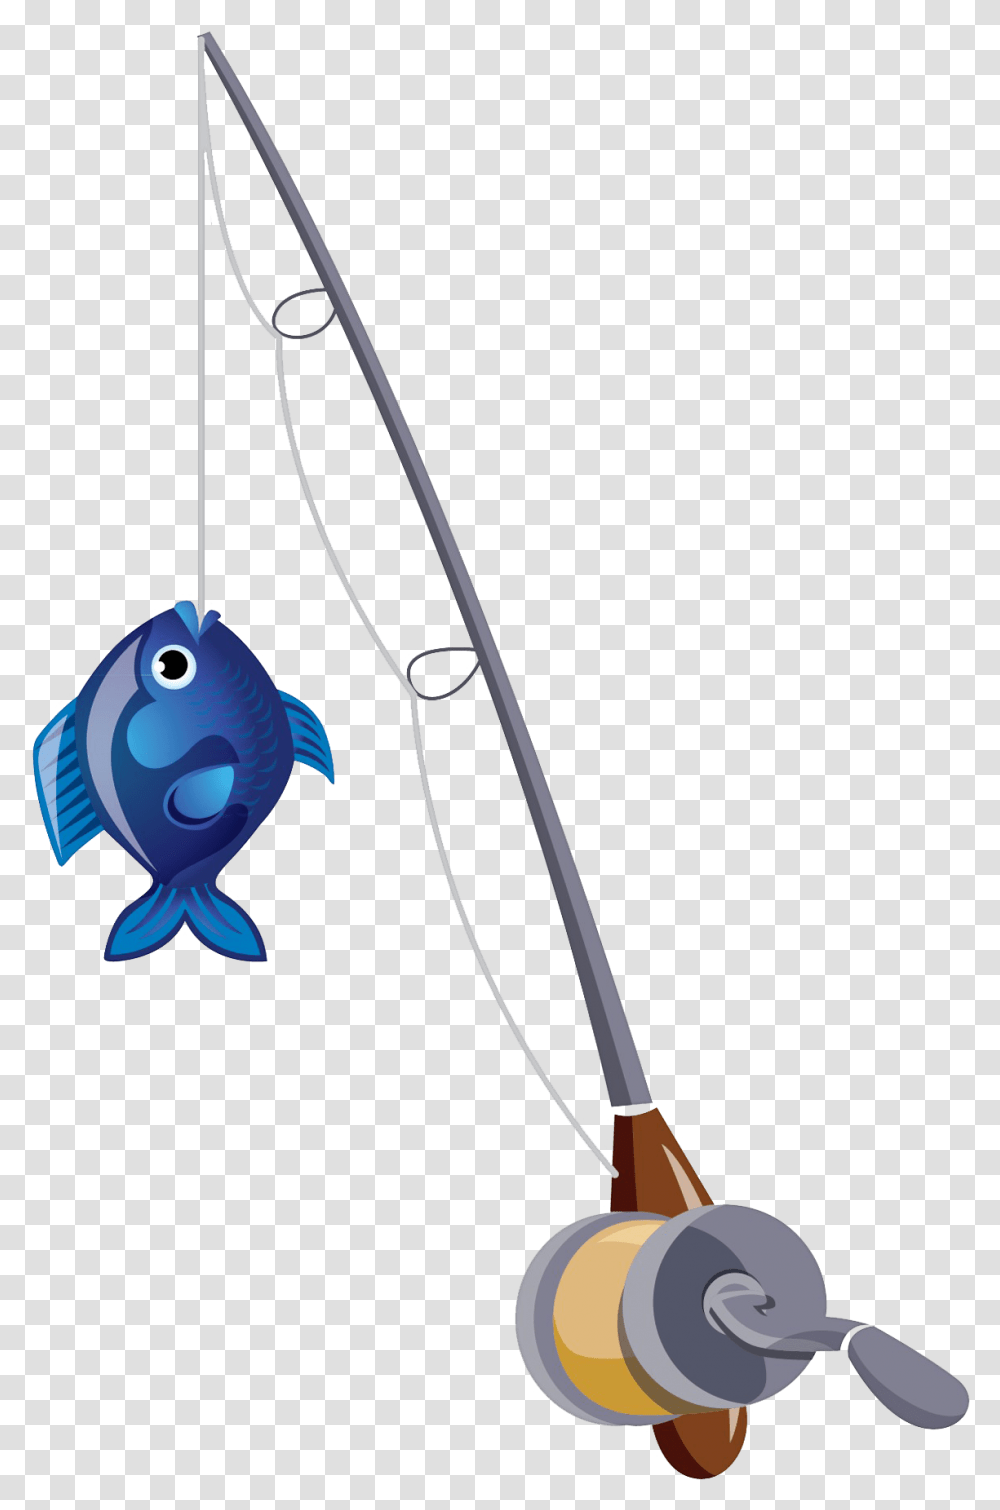 Fishing Pole Free Background Fishing Pole With Fish, Bow, Arrow Transparent Png